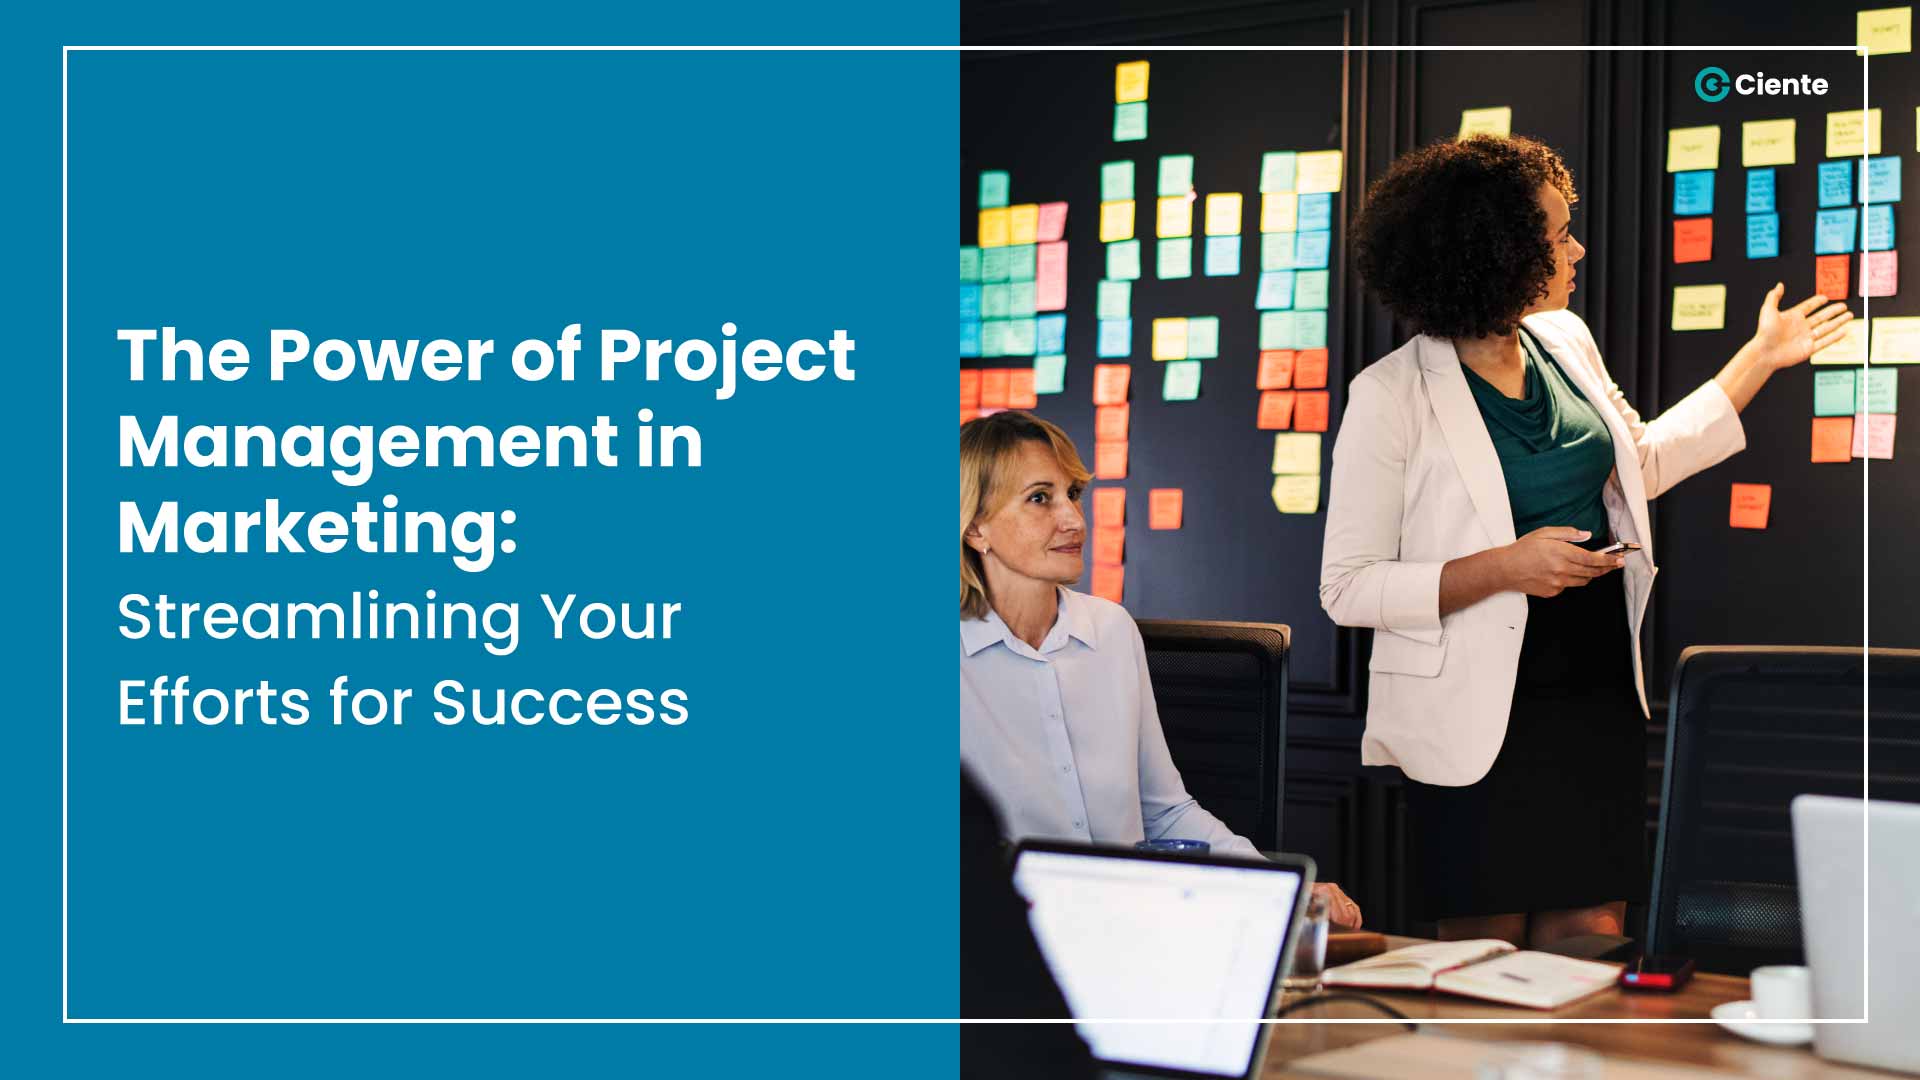 The Power of Project Management in Marketing: Streamlining Your Efforts for Success